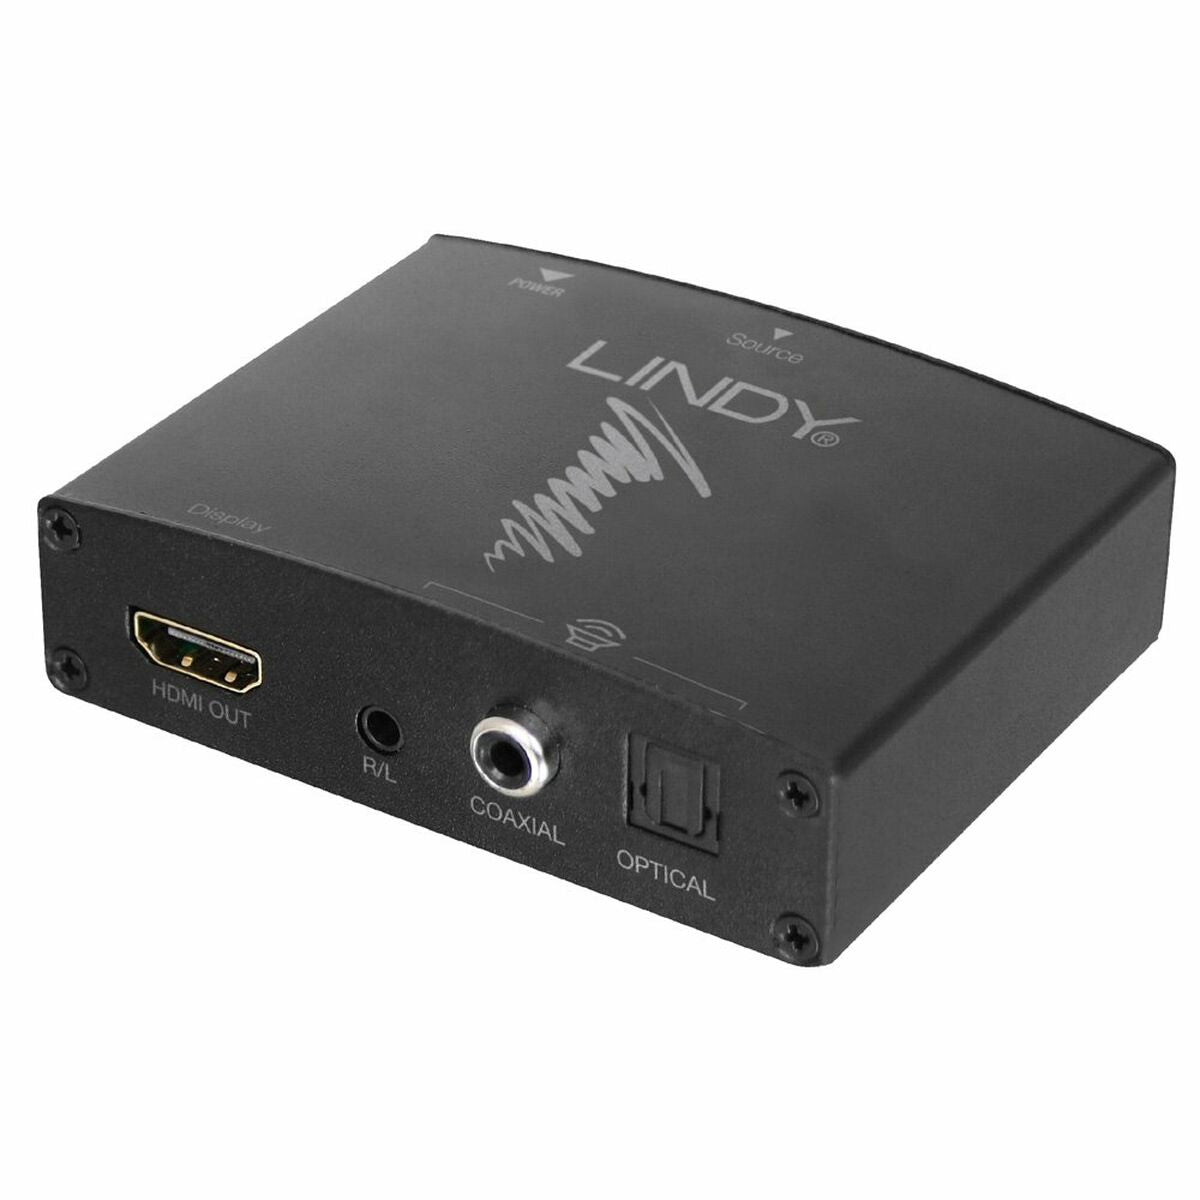 Audio Converter LINDY 38167 Black, LINDY, Electronics, TV, Video and home cinema, audio-converter-lindy-38167-black, :Ultra HD, Brand_LINDY, category-reference-2609, category-reference-2932, category-reference-2936, category-reference-t-18805, category-reference-t-19653, category-reference-t-19921, cinema and television, Condition_NEW, entertainment, fotografía, Price_50 - 100, travel, RiotNook